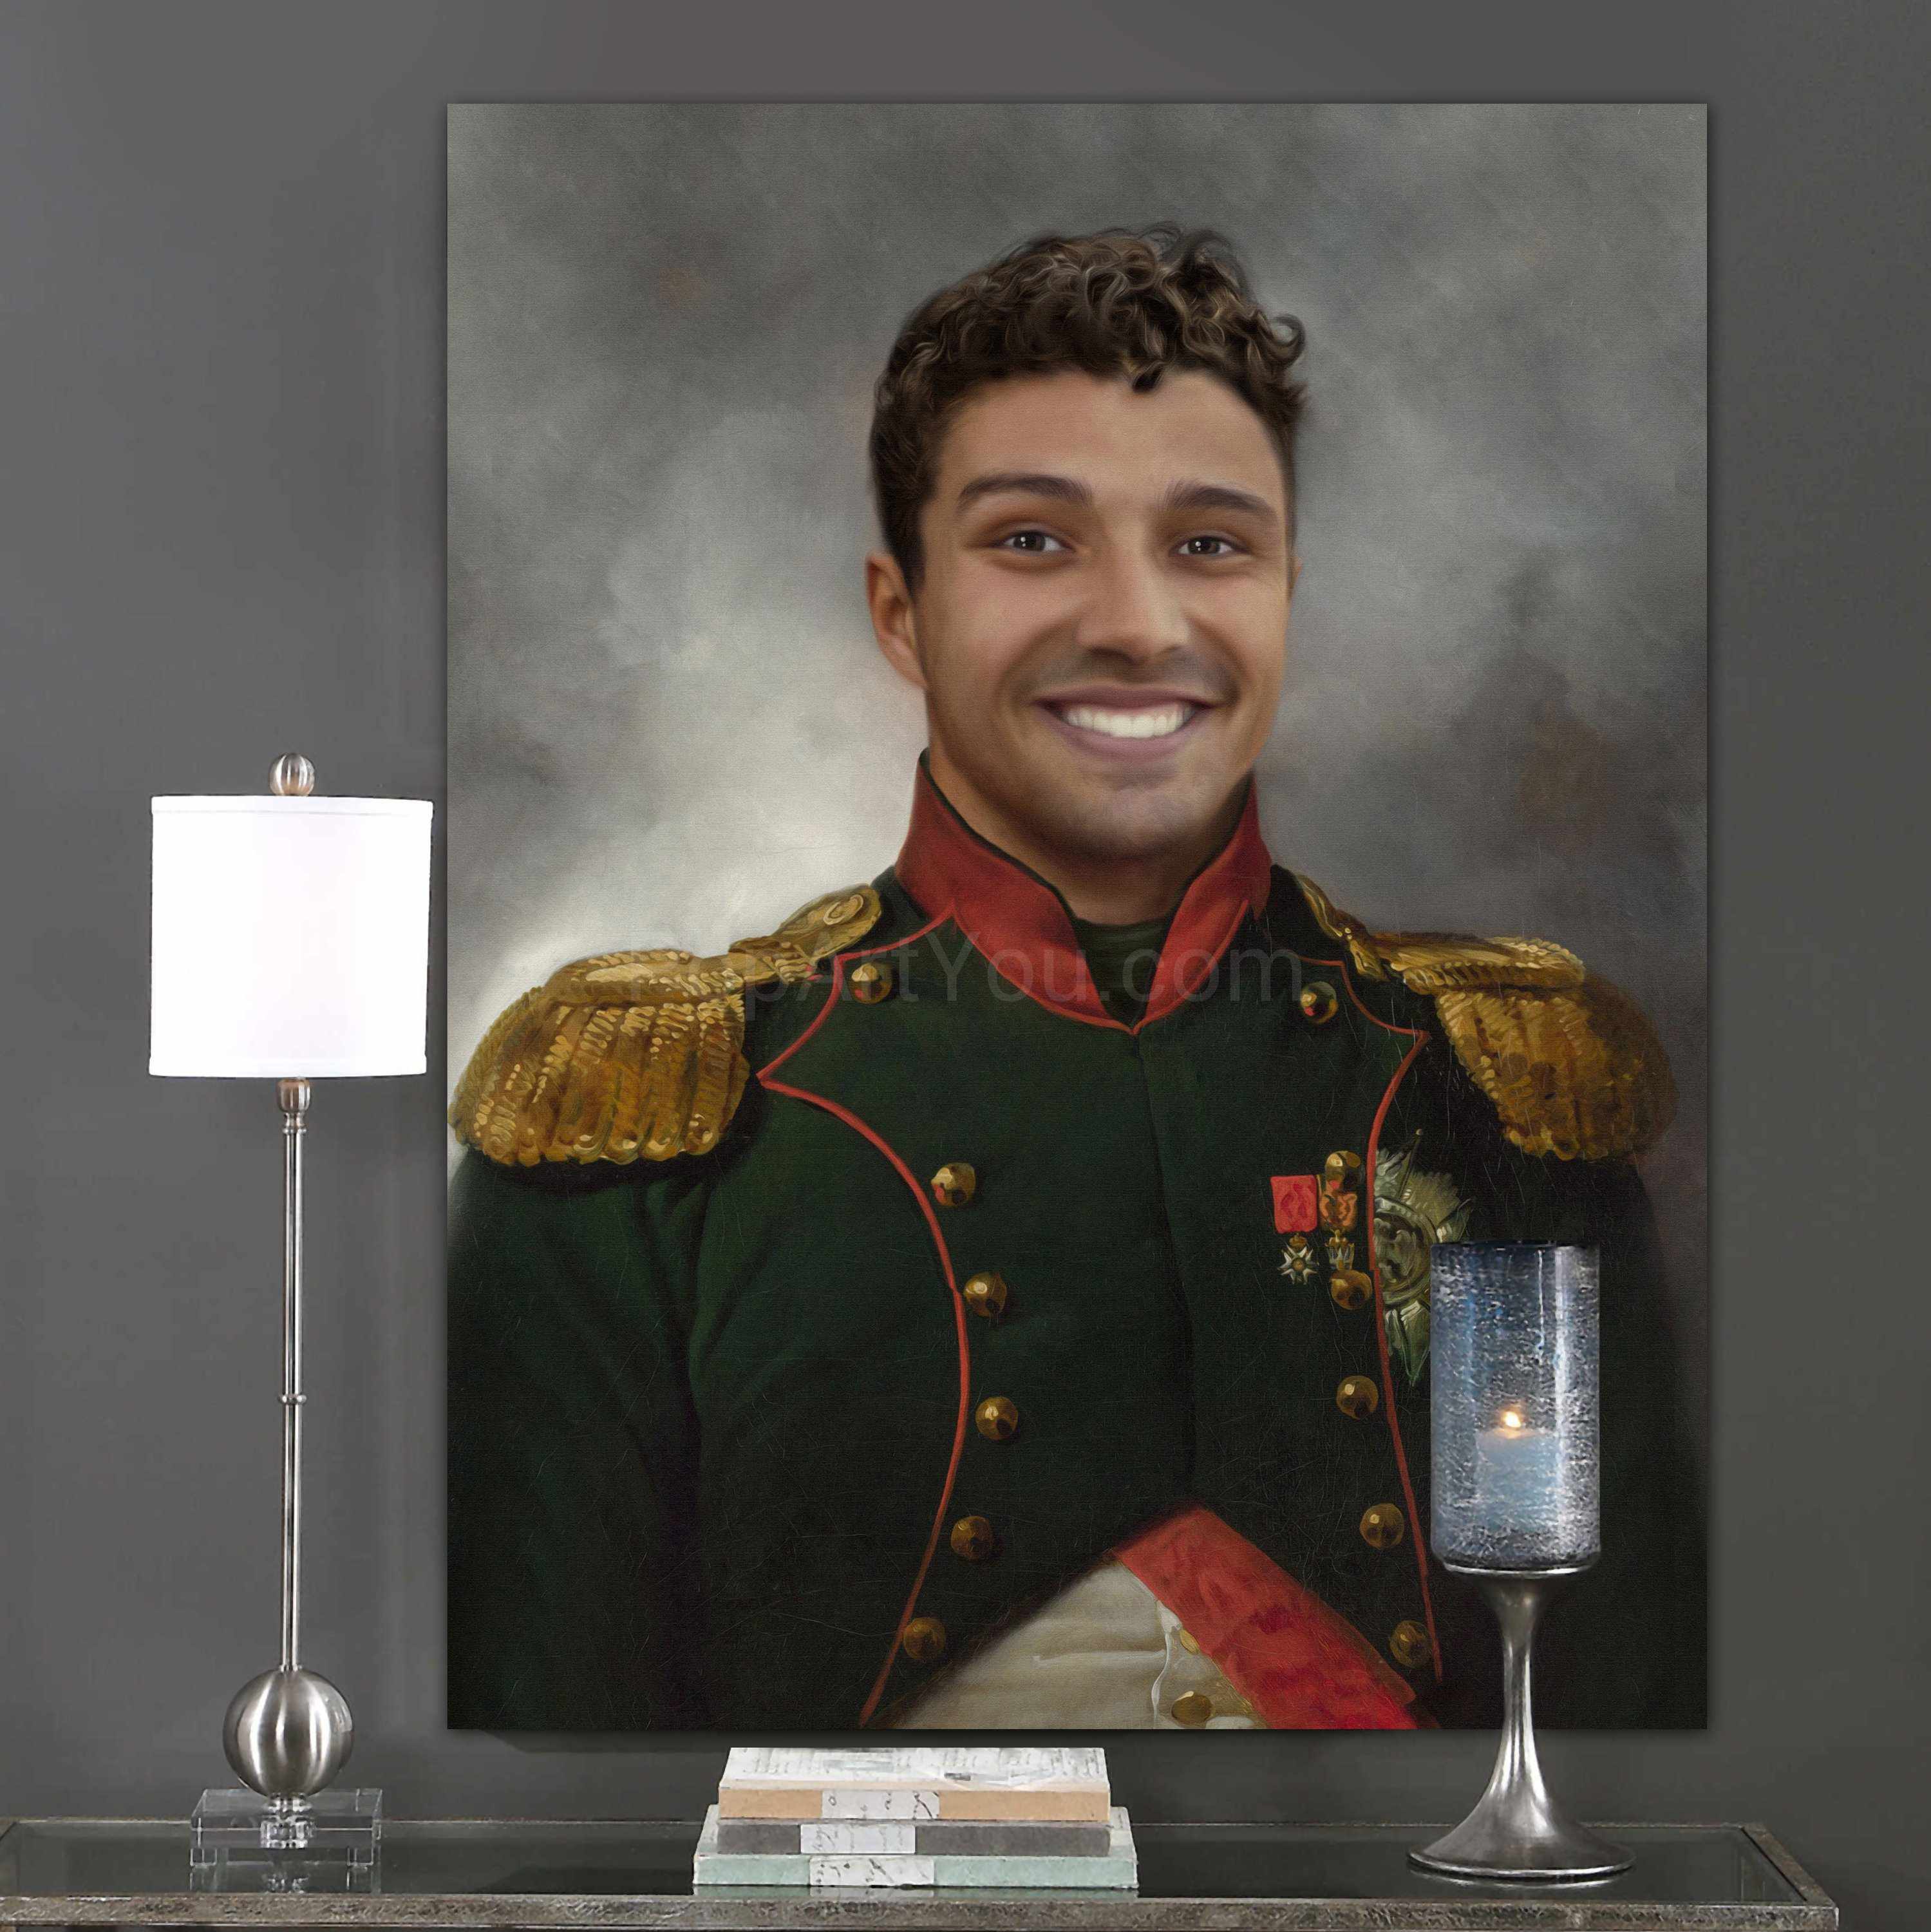 A portrait of a smiling man dressed in historical royal clothes hangs on a gray wall above a candle